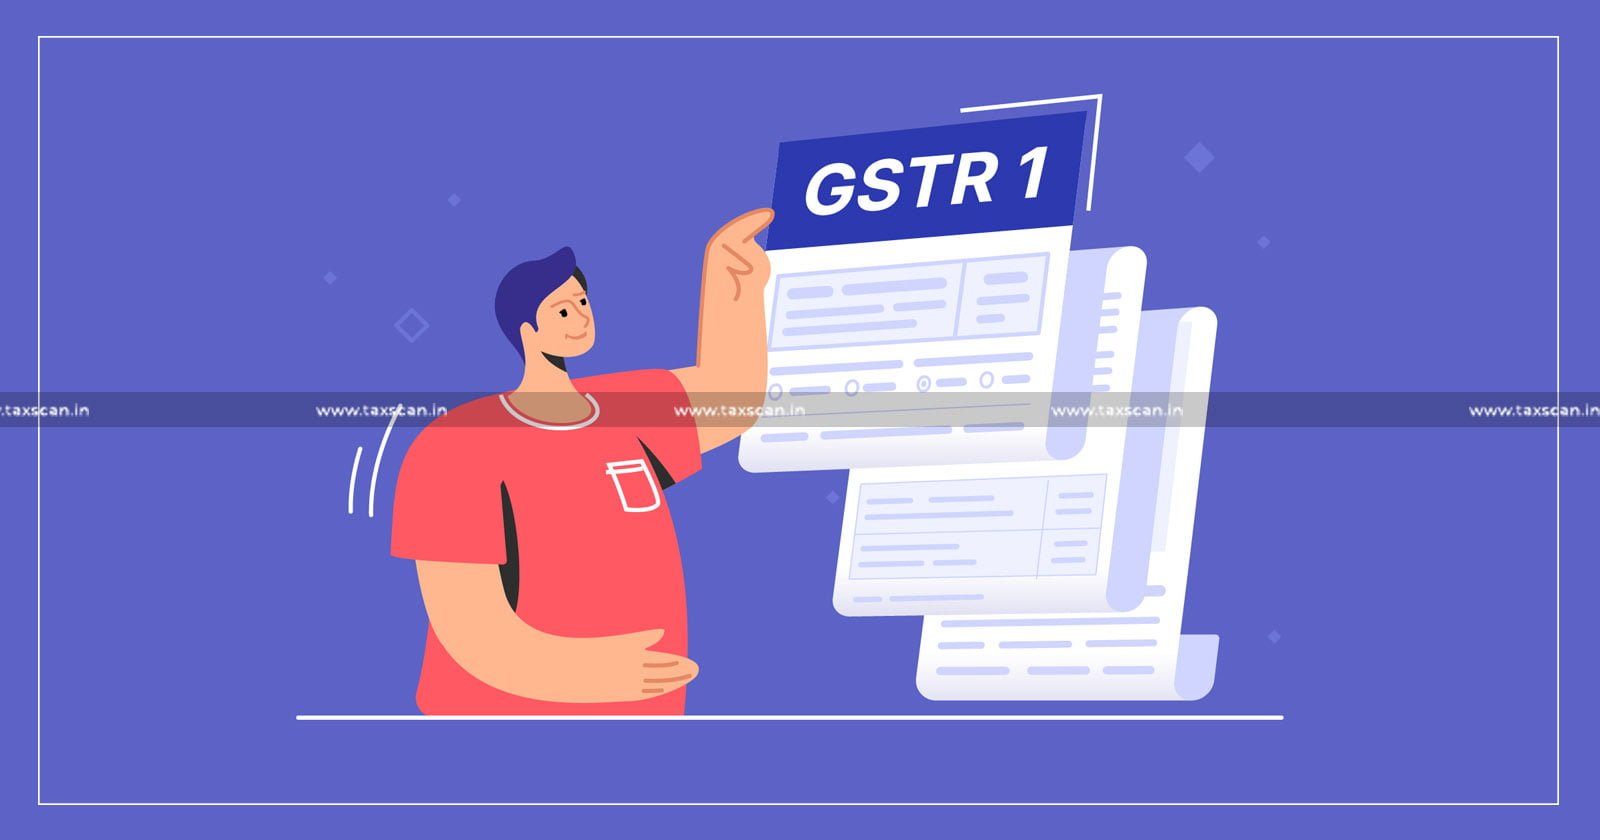 Big Update - GSTR 1 Due Date - Extended amidst - Technical Issues - taxscan